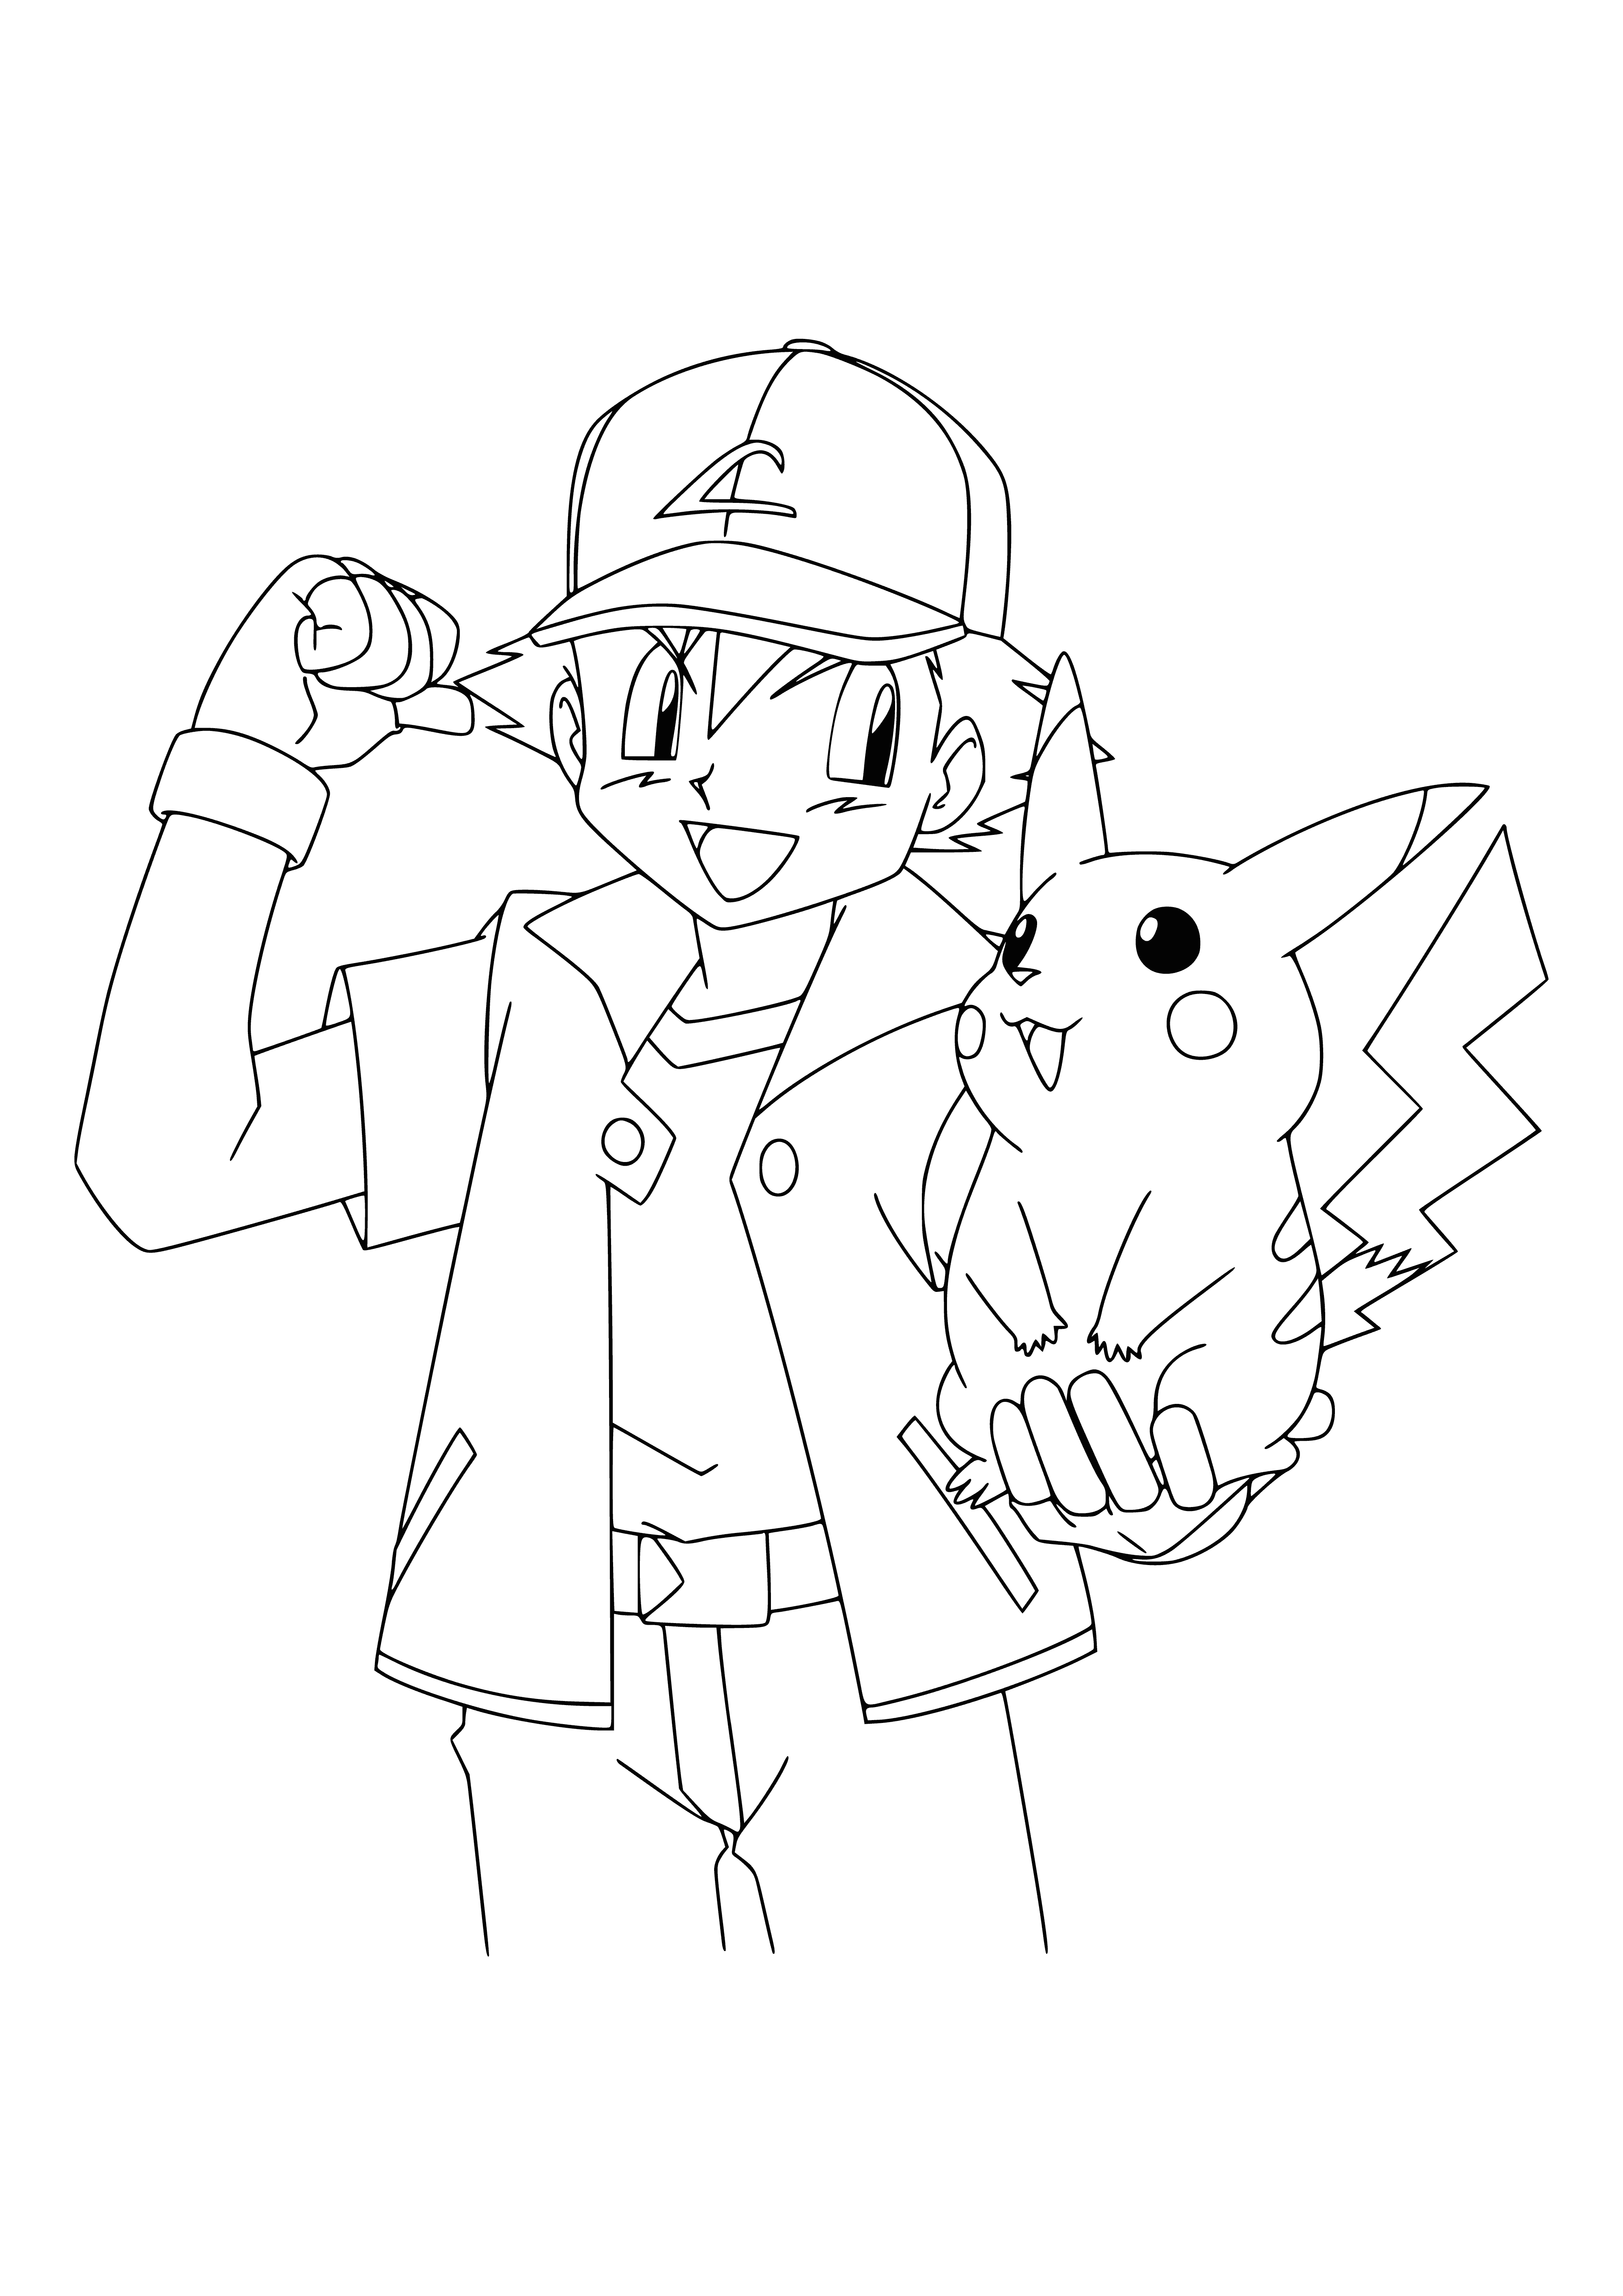 Ash and Pikachu coloring page